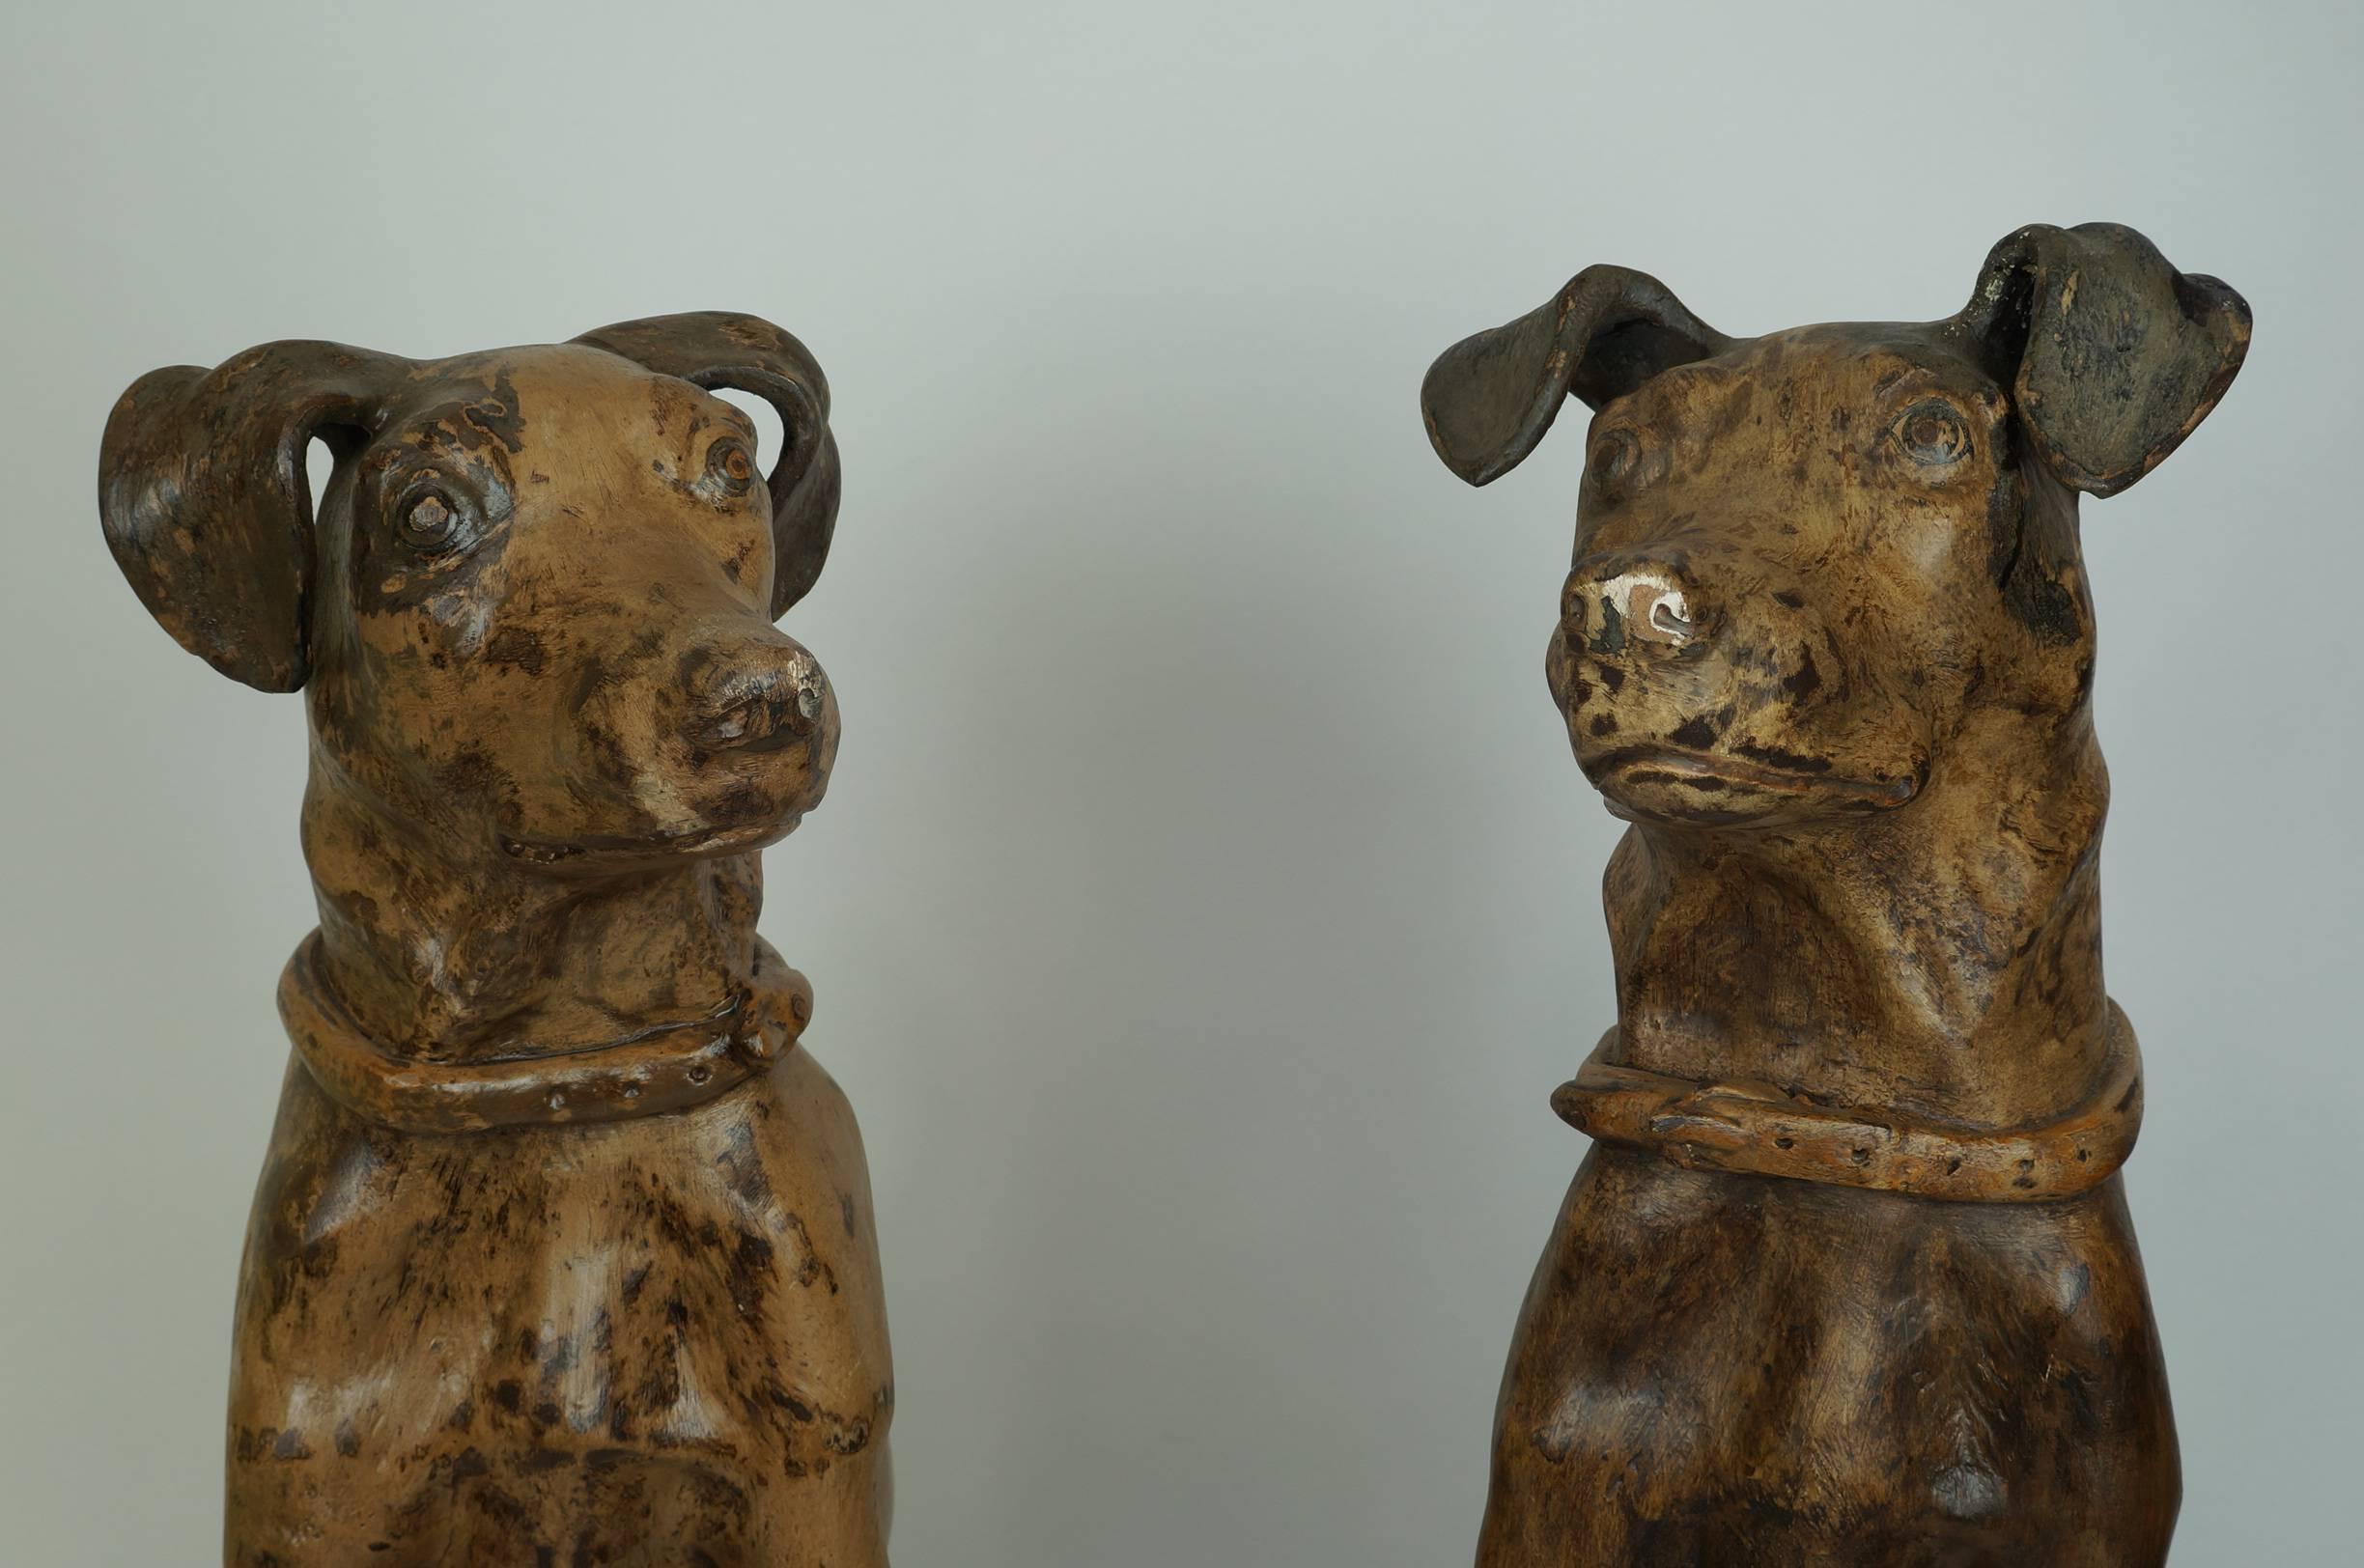 Pair of Terracotta Composition Seated Dogs
Stock Number: DA196